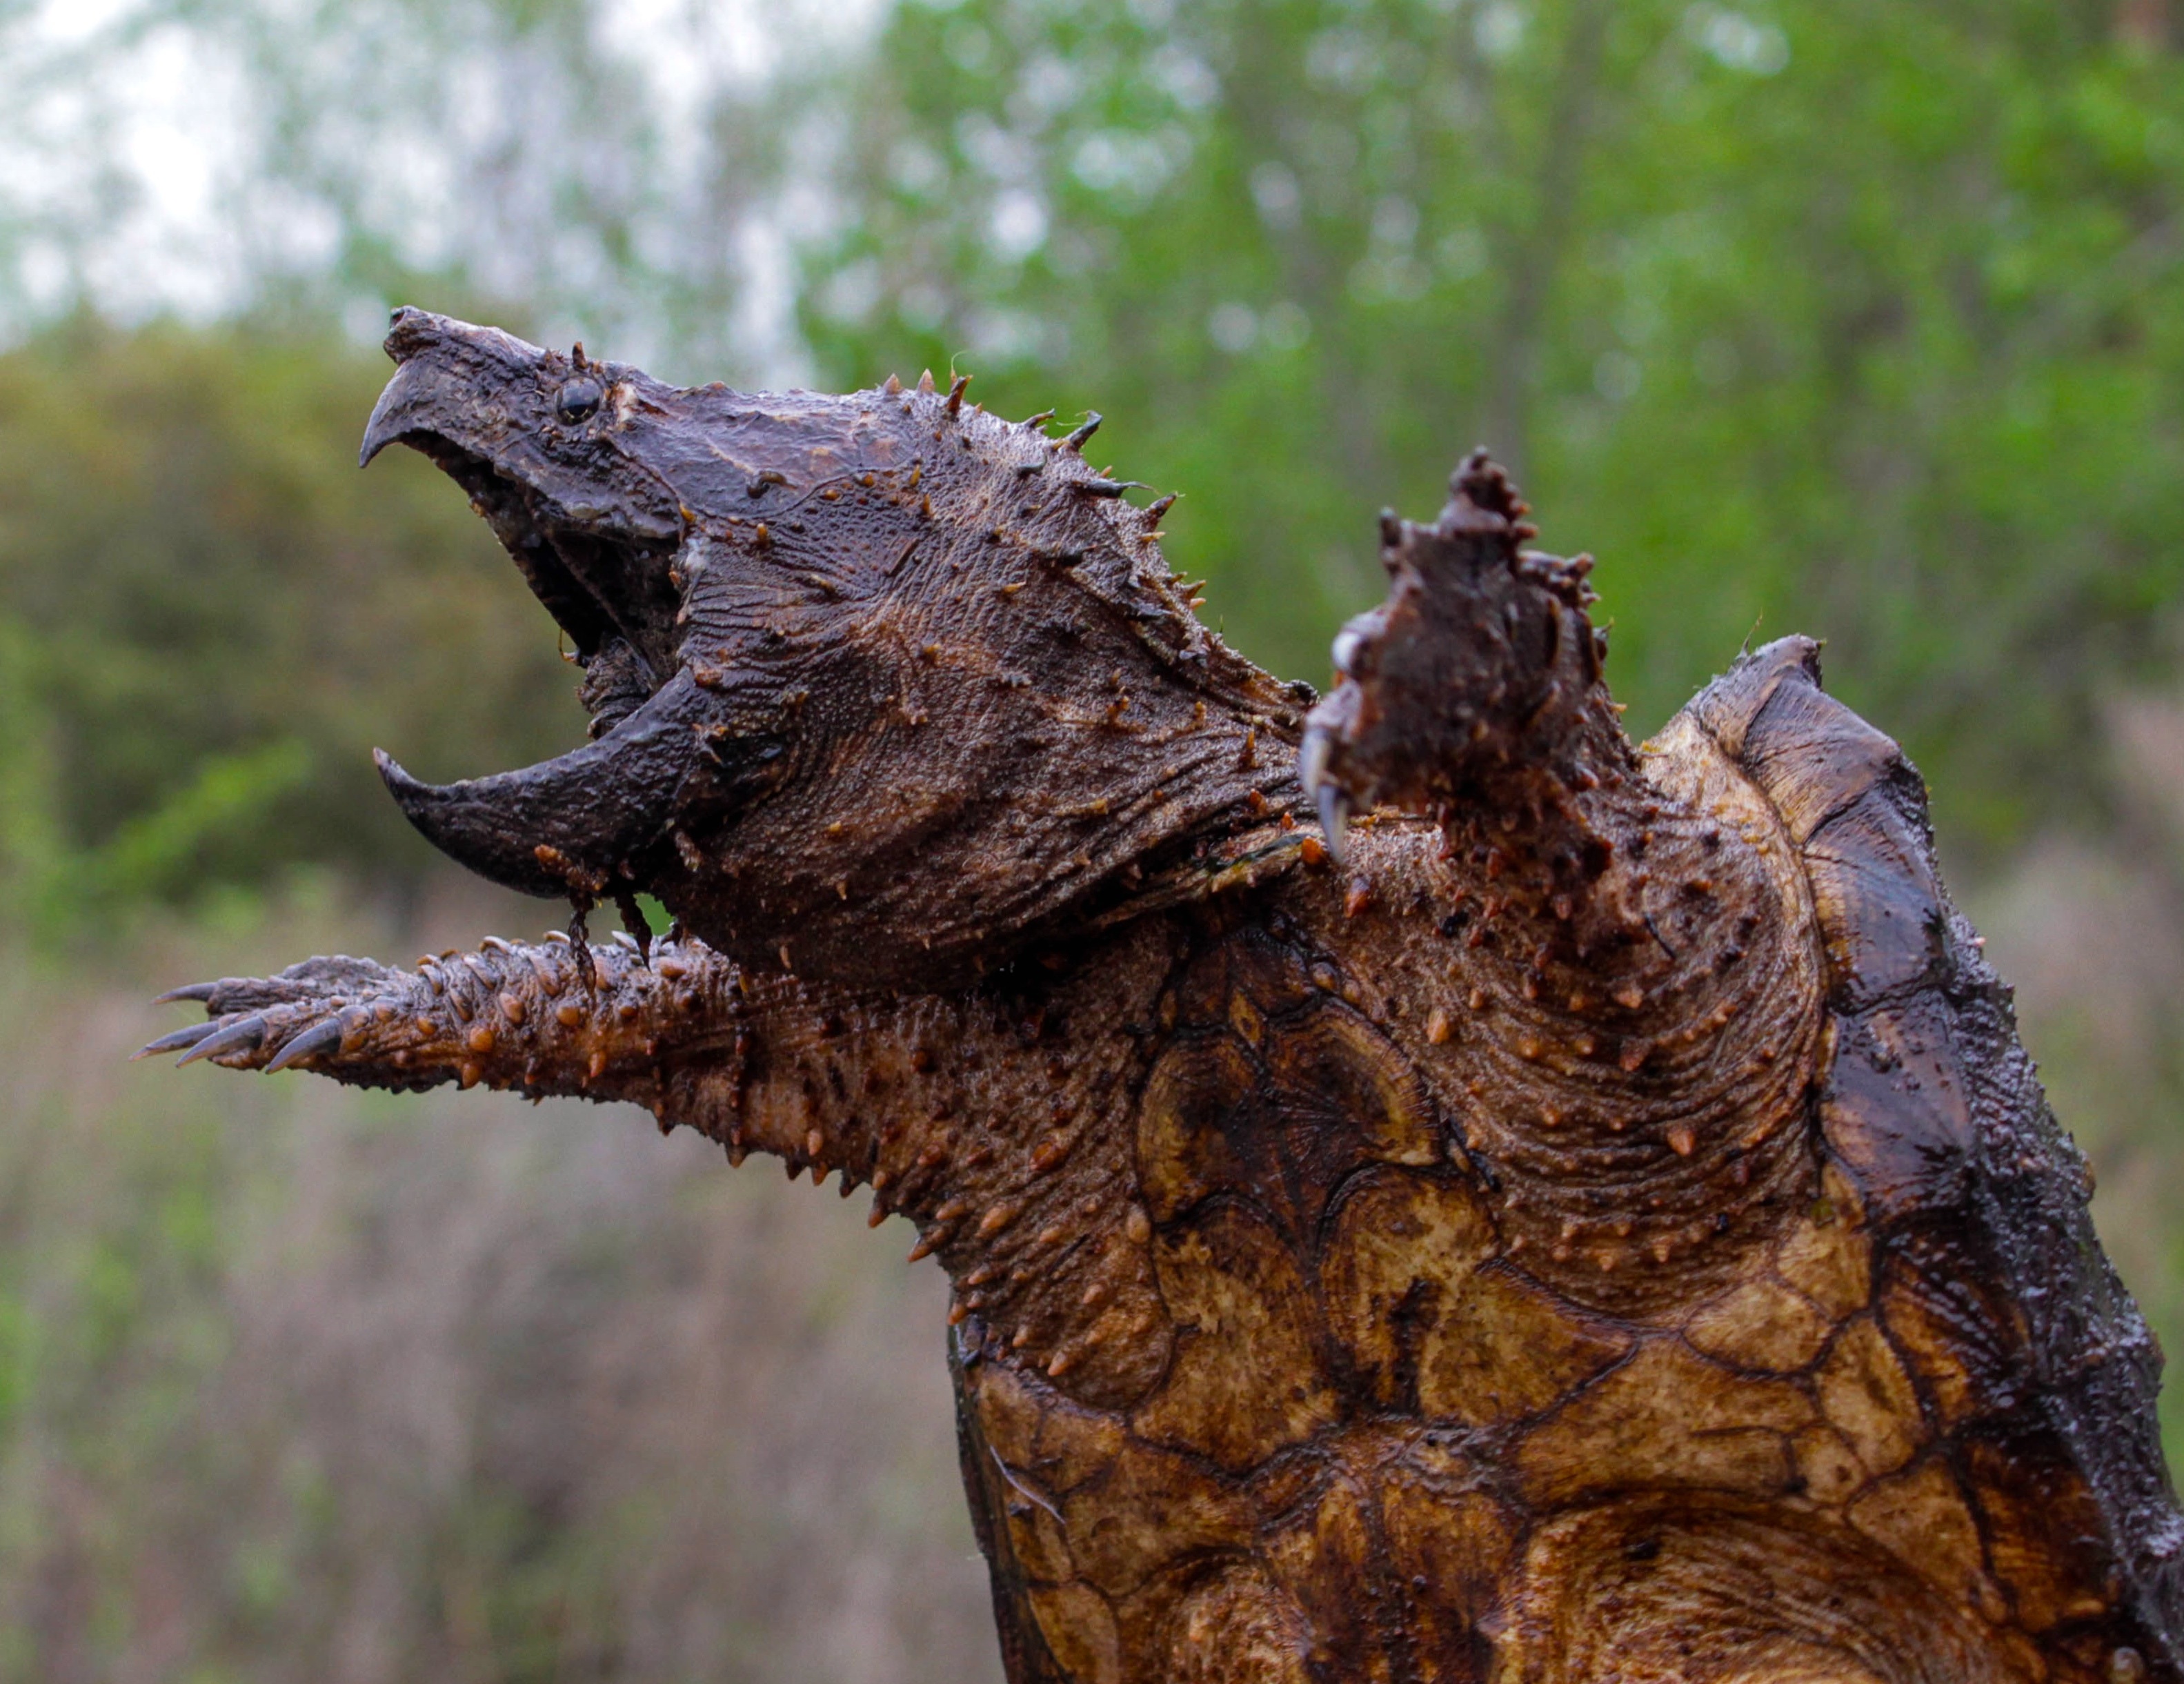 Solution for Rare Alligator Snapping Turtles Found? – The Fisheries Blog